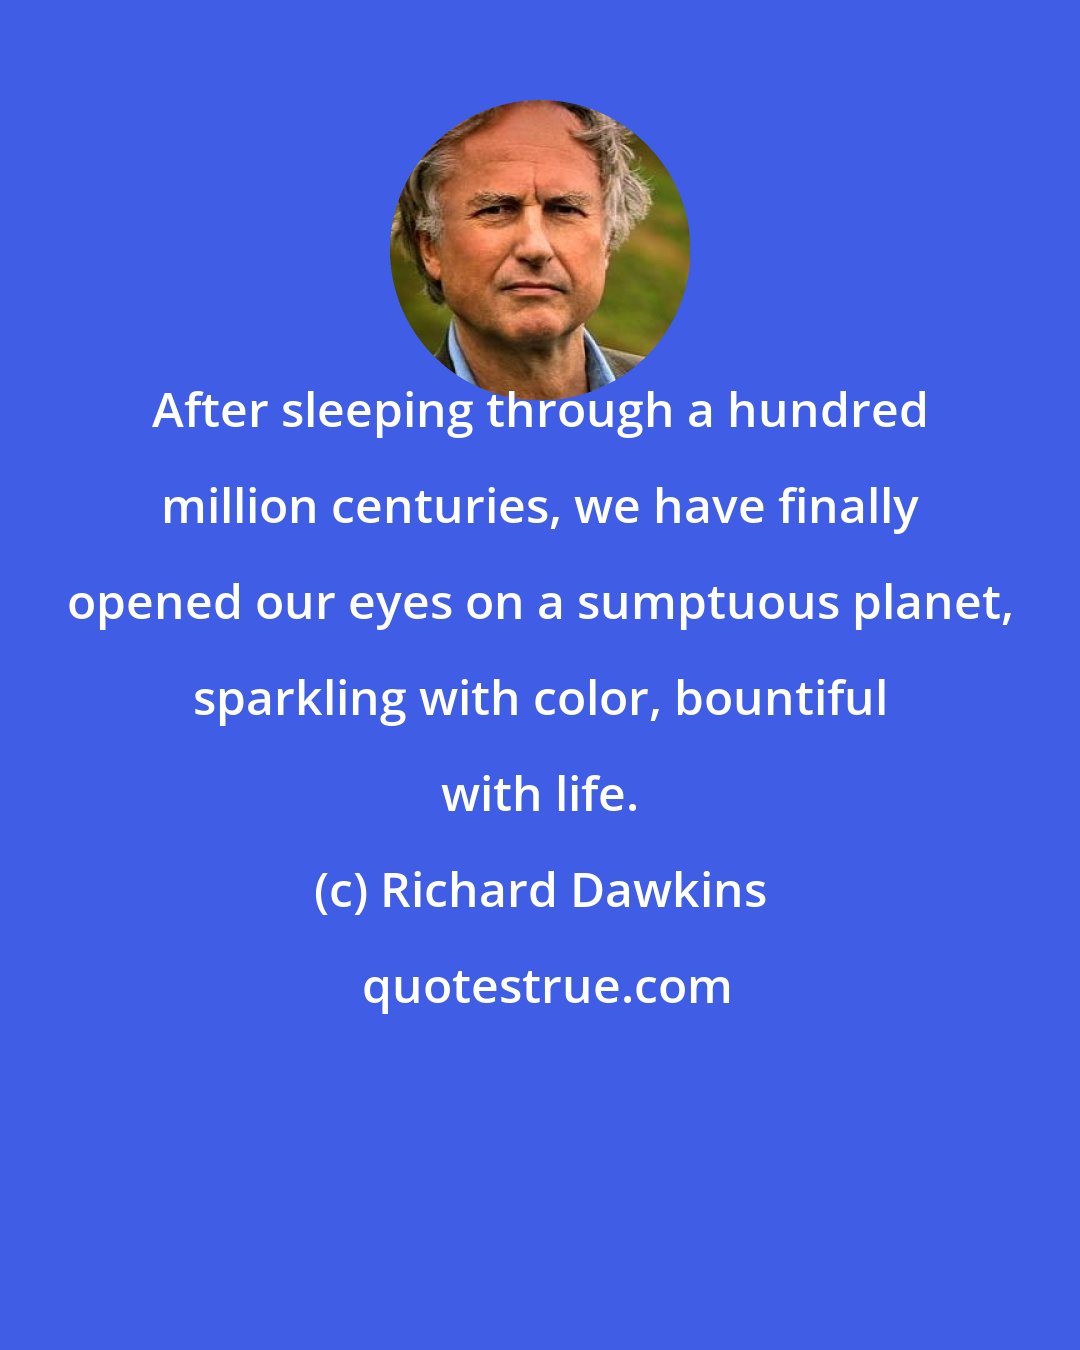 Richard Dawkins: After sleeping through a hundred million centuries, we have finally opened our eyes on a sumptuous planet, sparkling with color, bountiful with life.